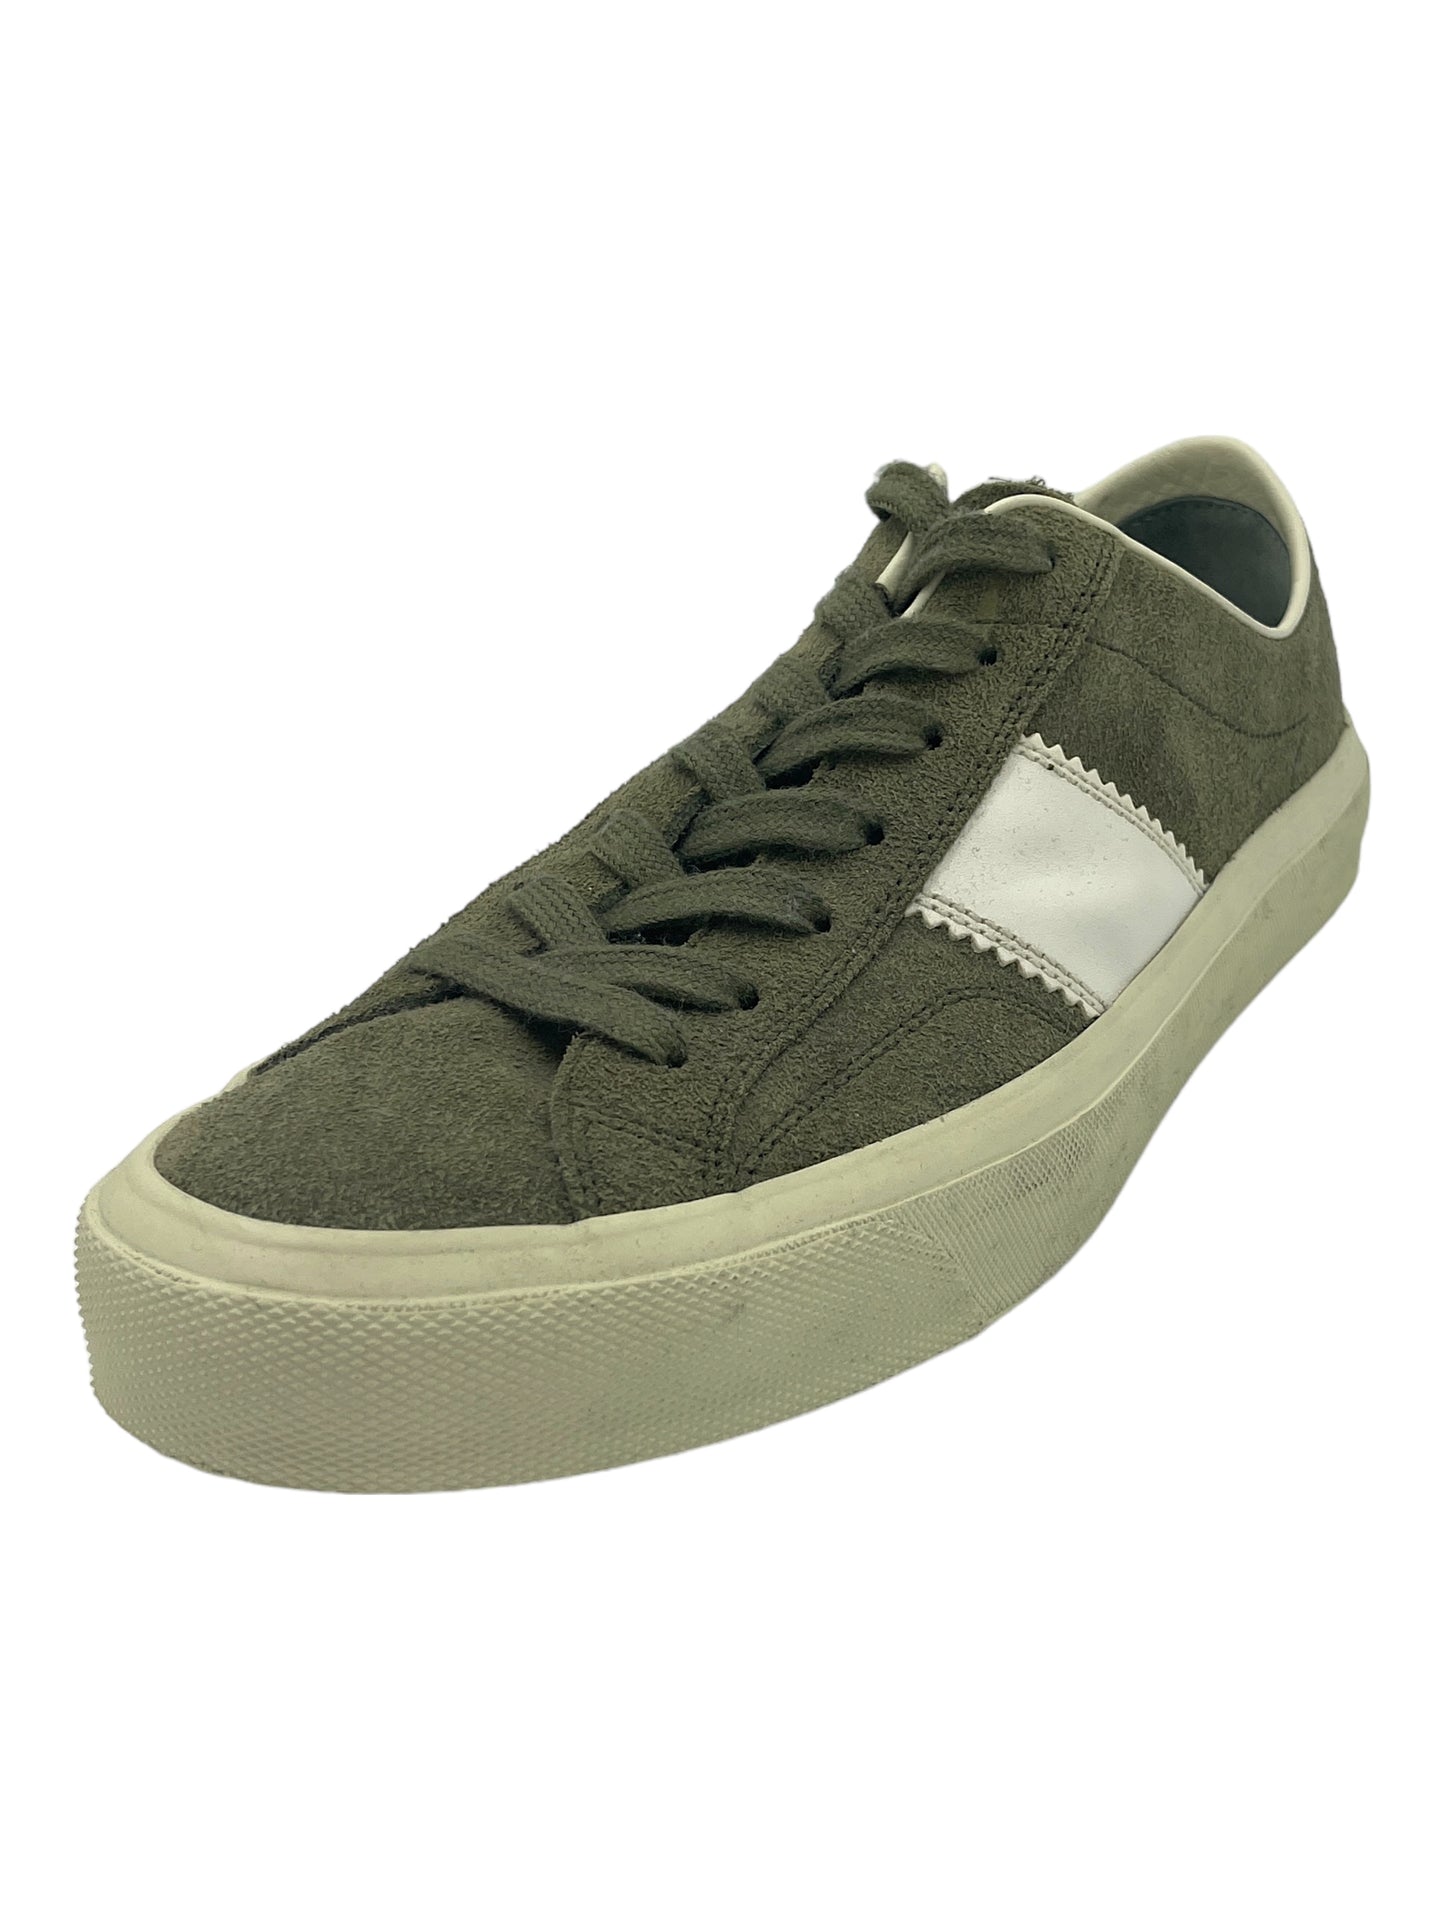 Tom Ford Green Suede Cambridge Lace Up Sneaker